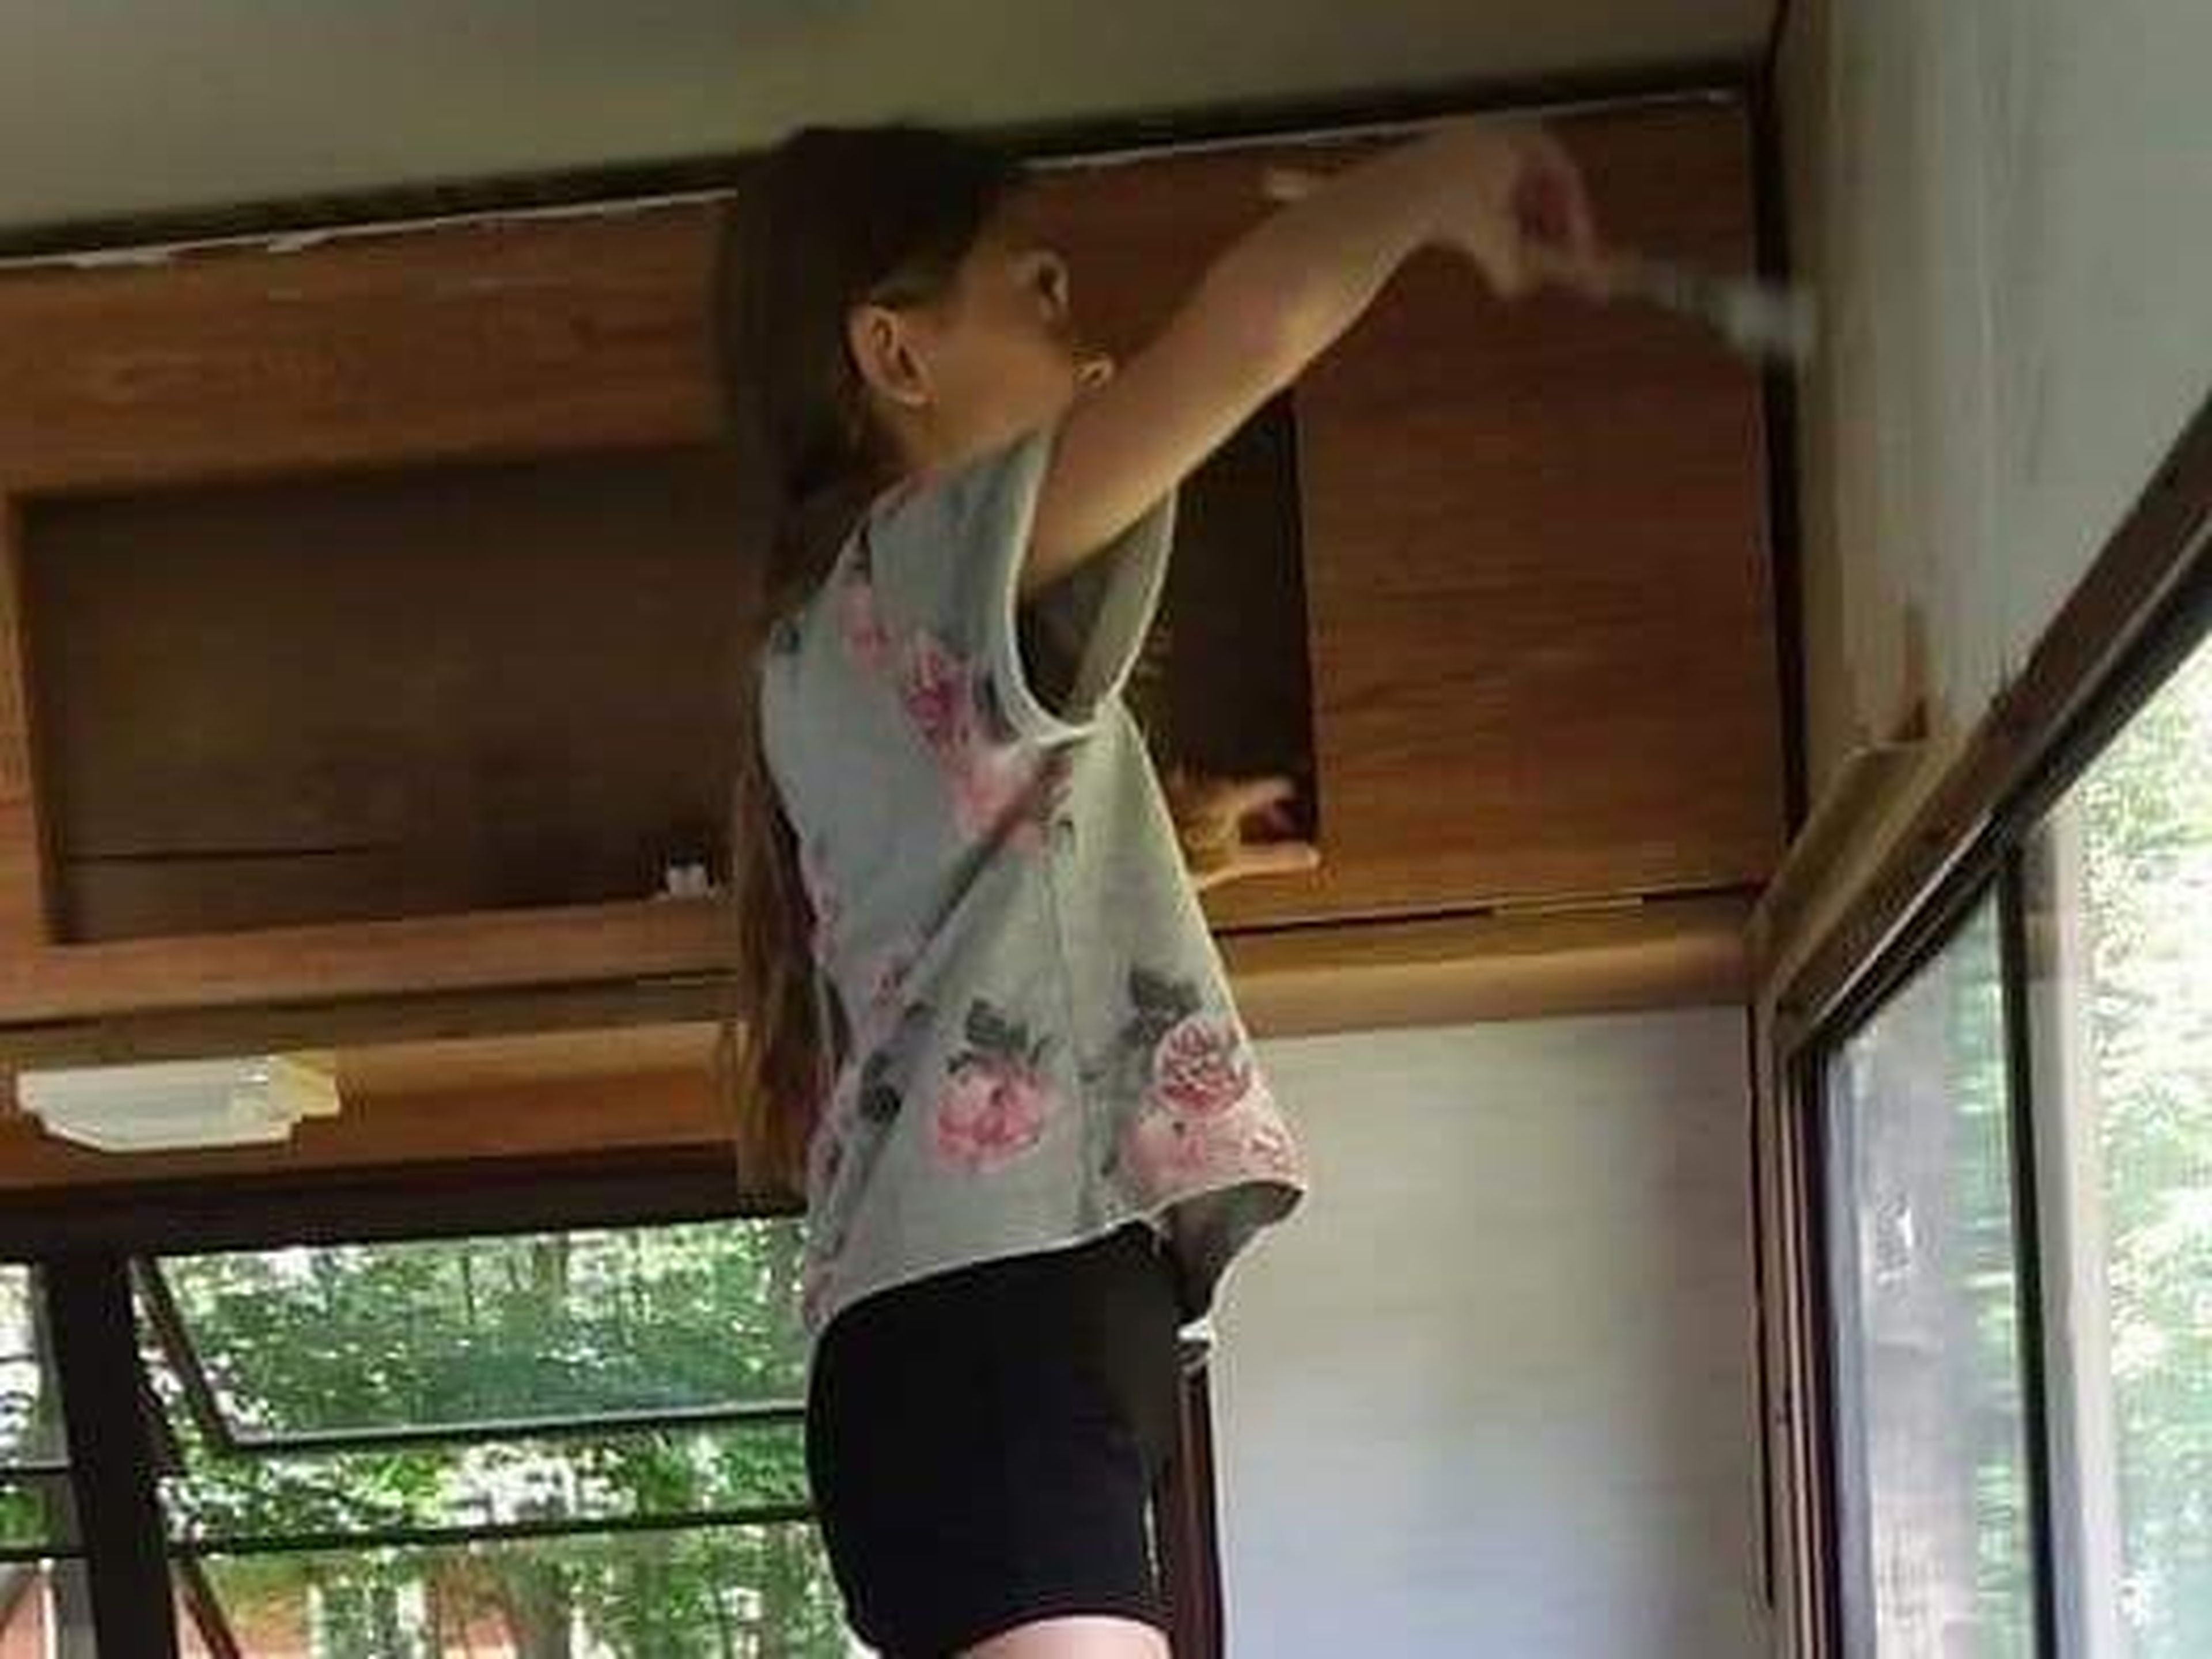 Lauren painting the camper. Courtesy of Aimee Nelson